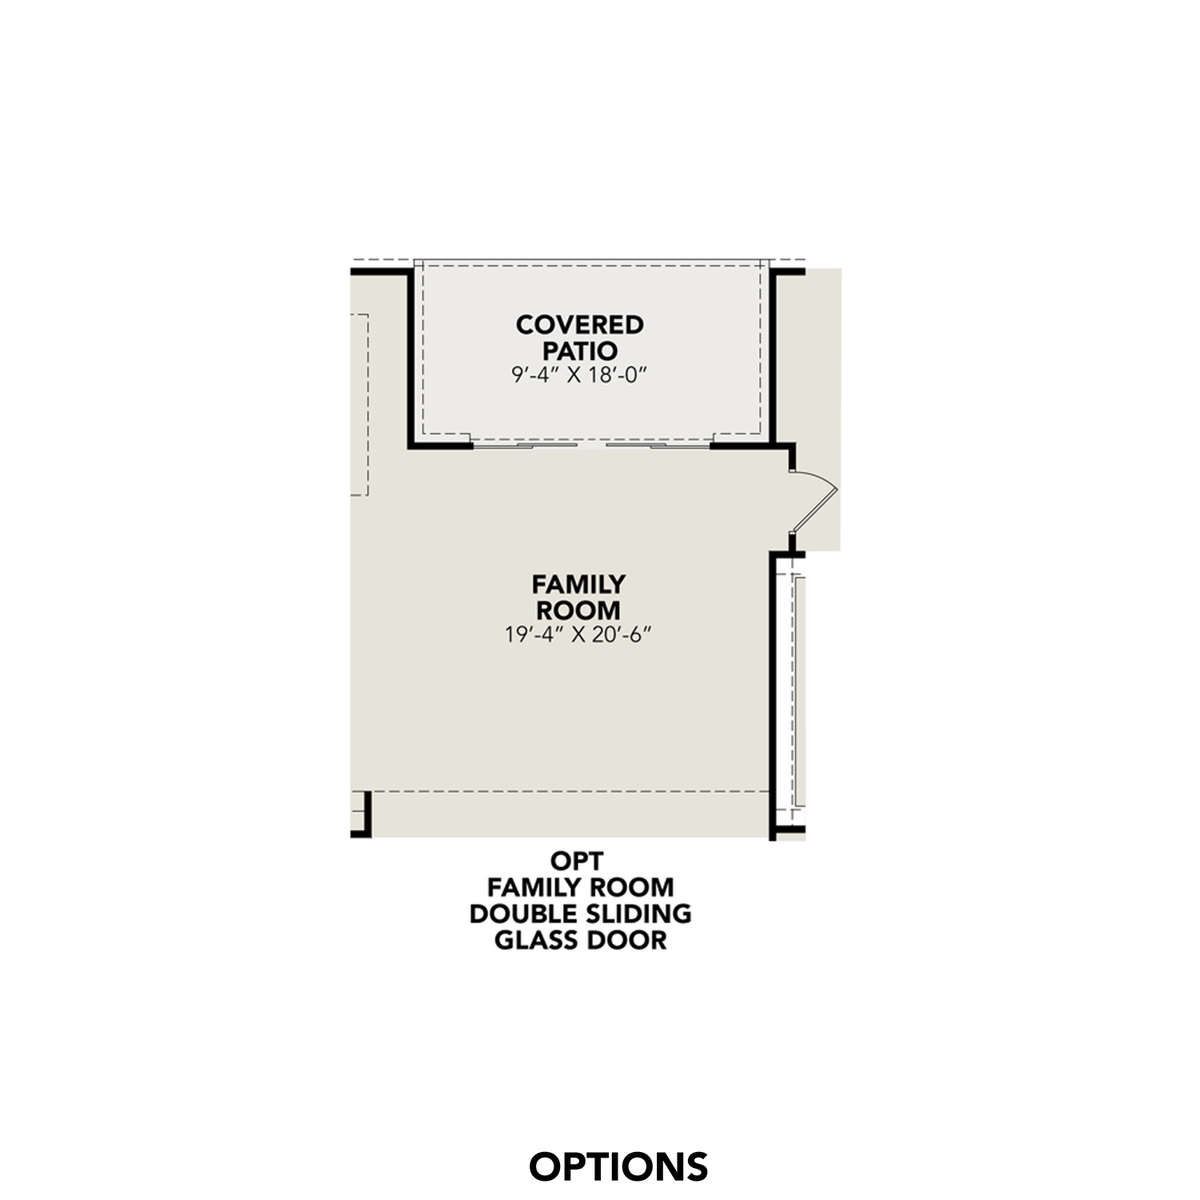 5 - The Jennings G buildable floor plan layout in Davidson Homes' Ladera community.